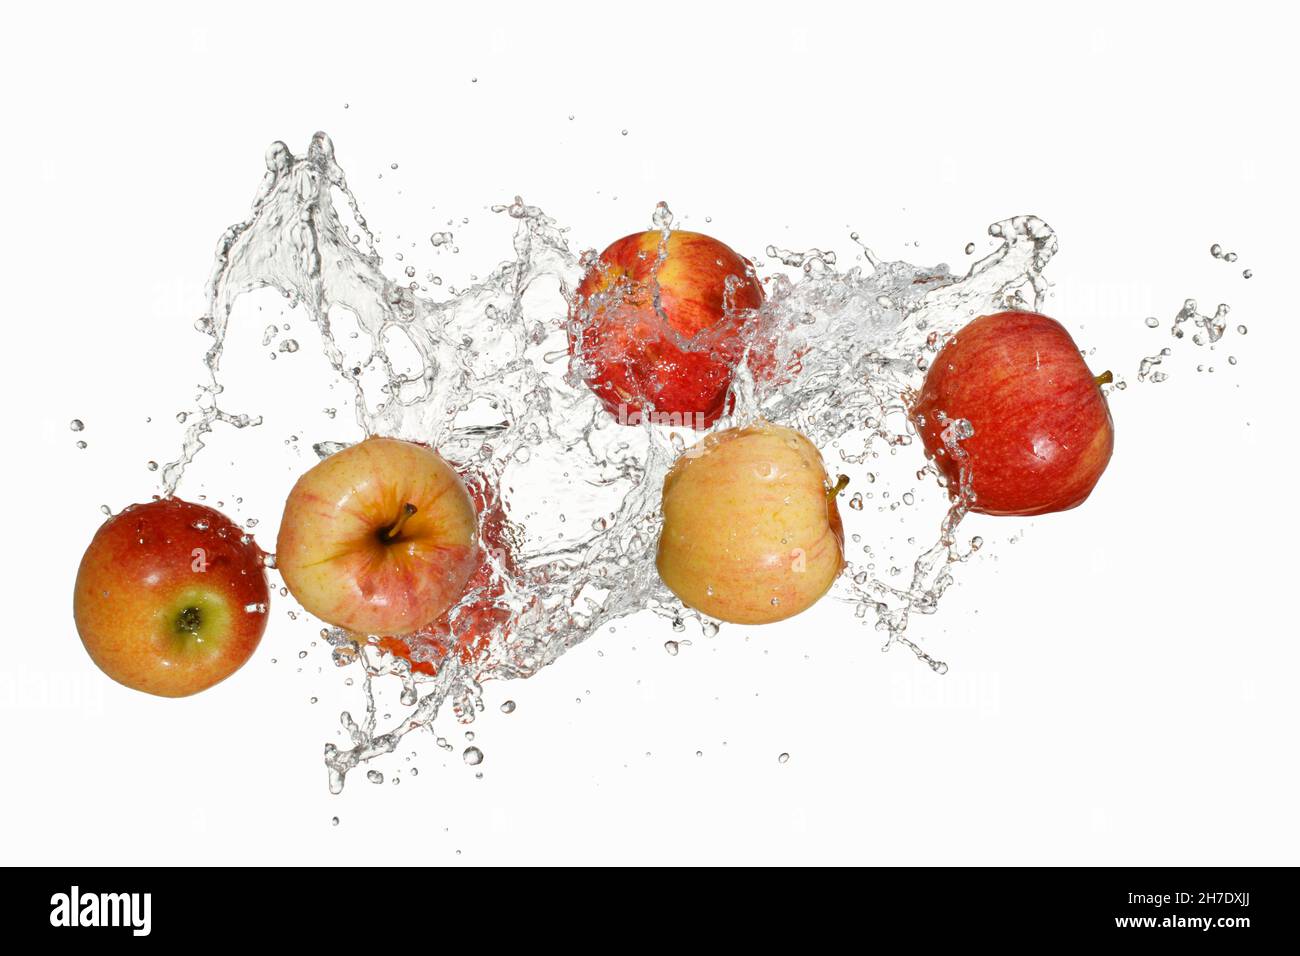 Apples with a splash of water Stock Photo